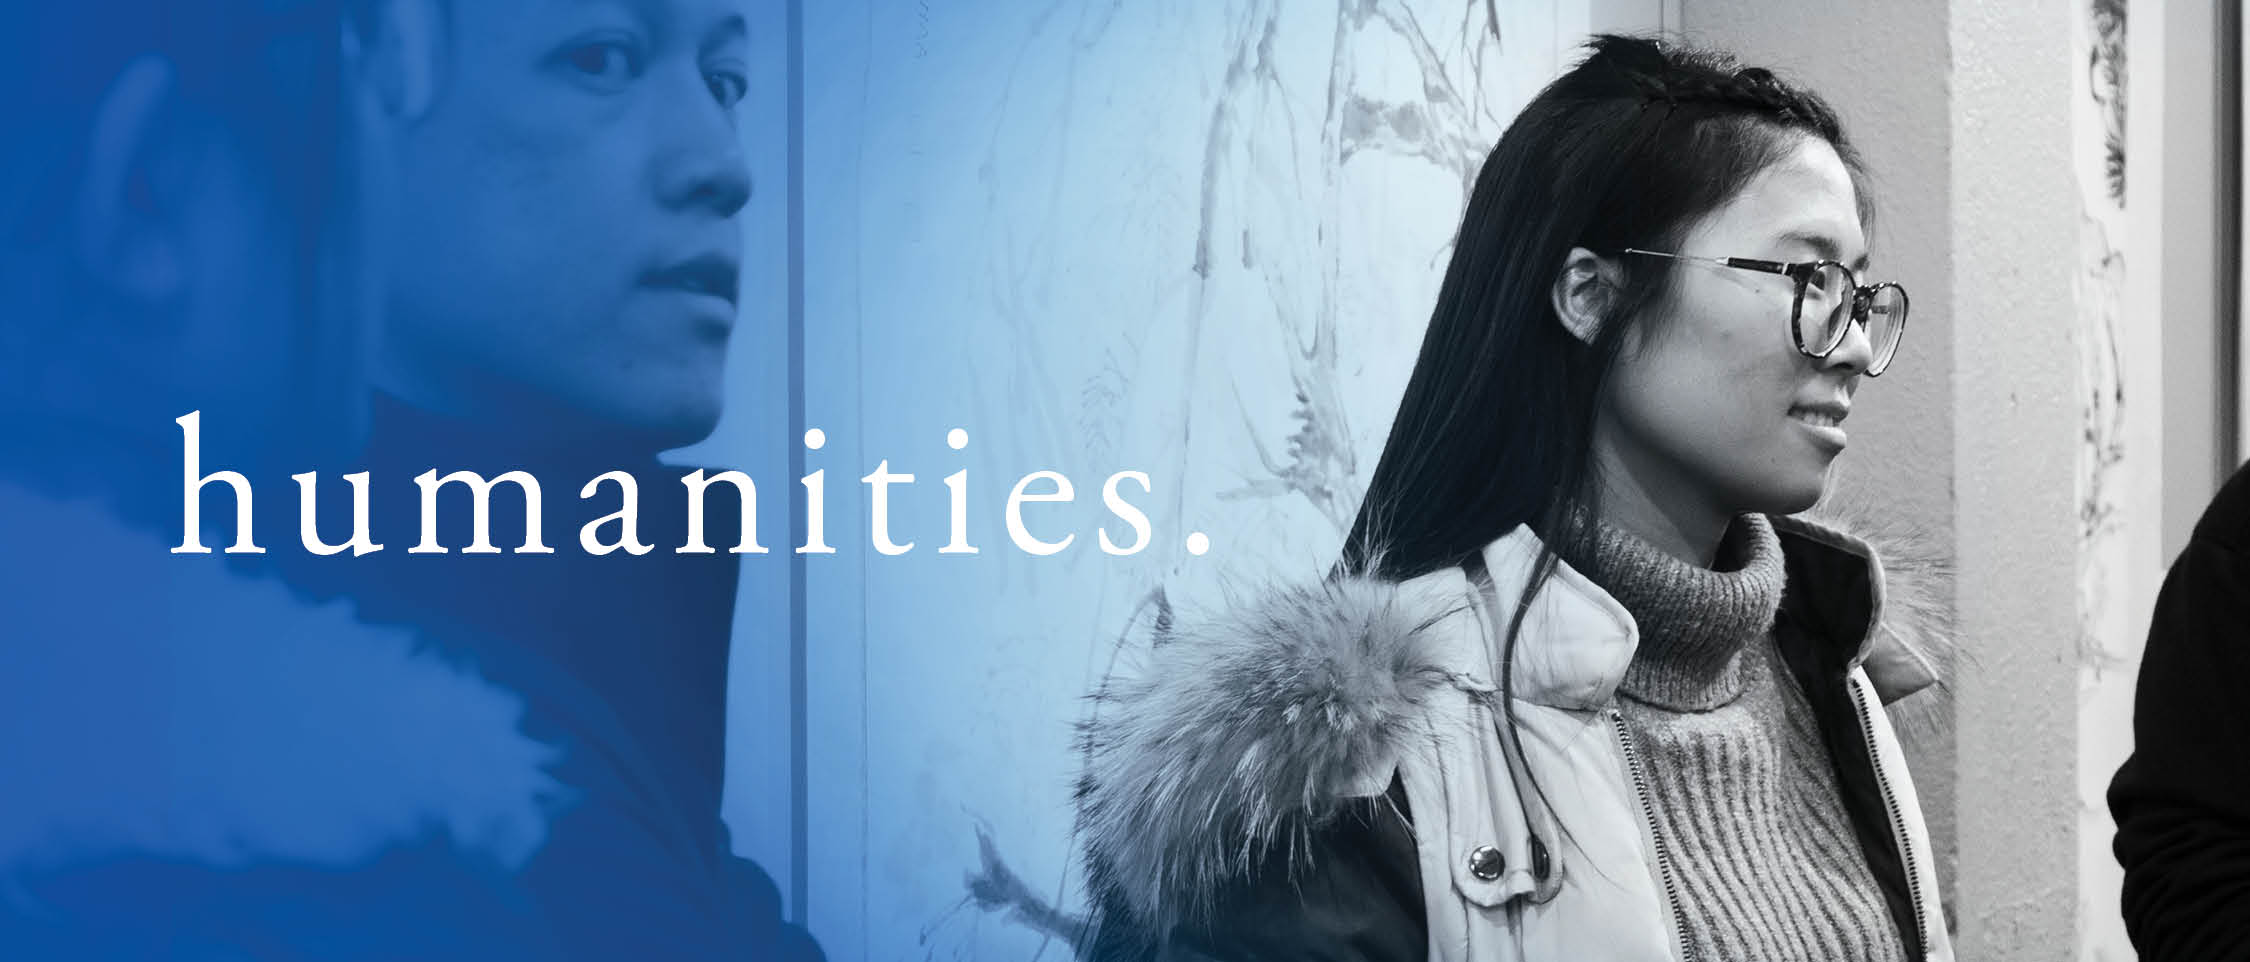 humanities banner- 2018bw